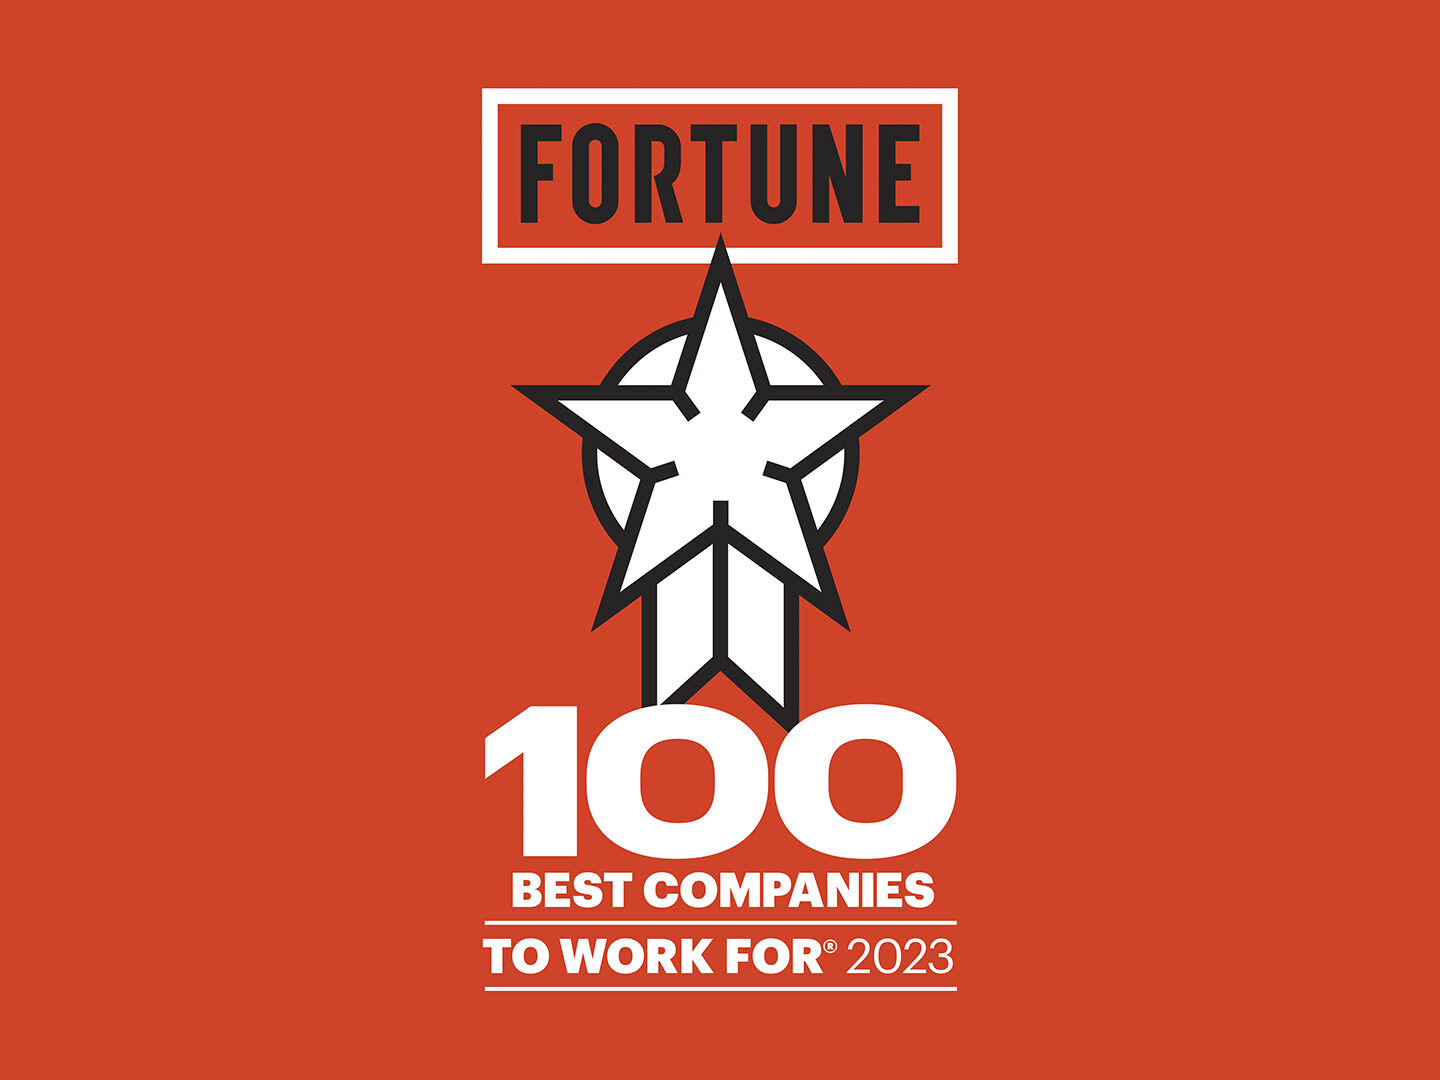 Fortune Top 100 Best Copnanies To Work For 2023 logo 